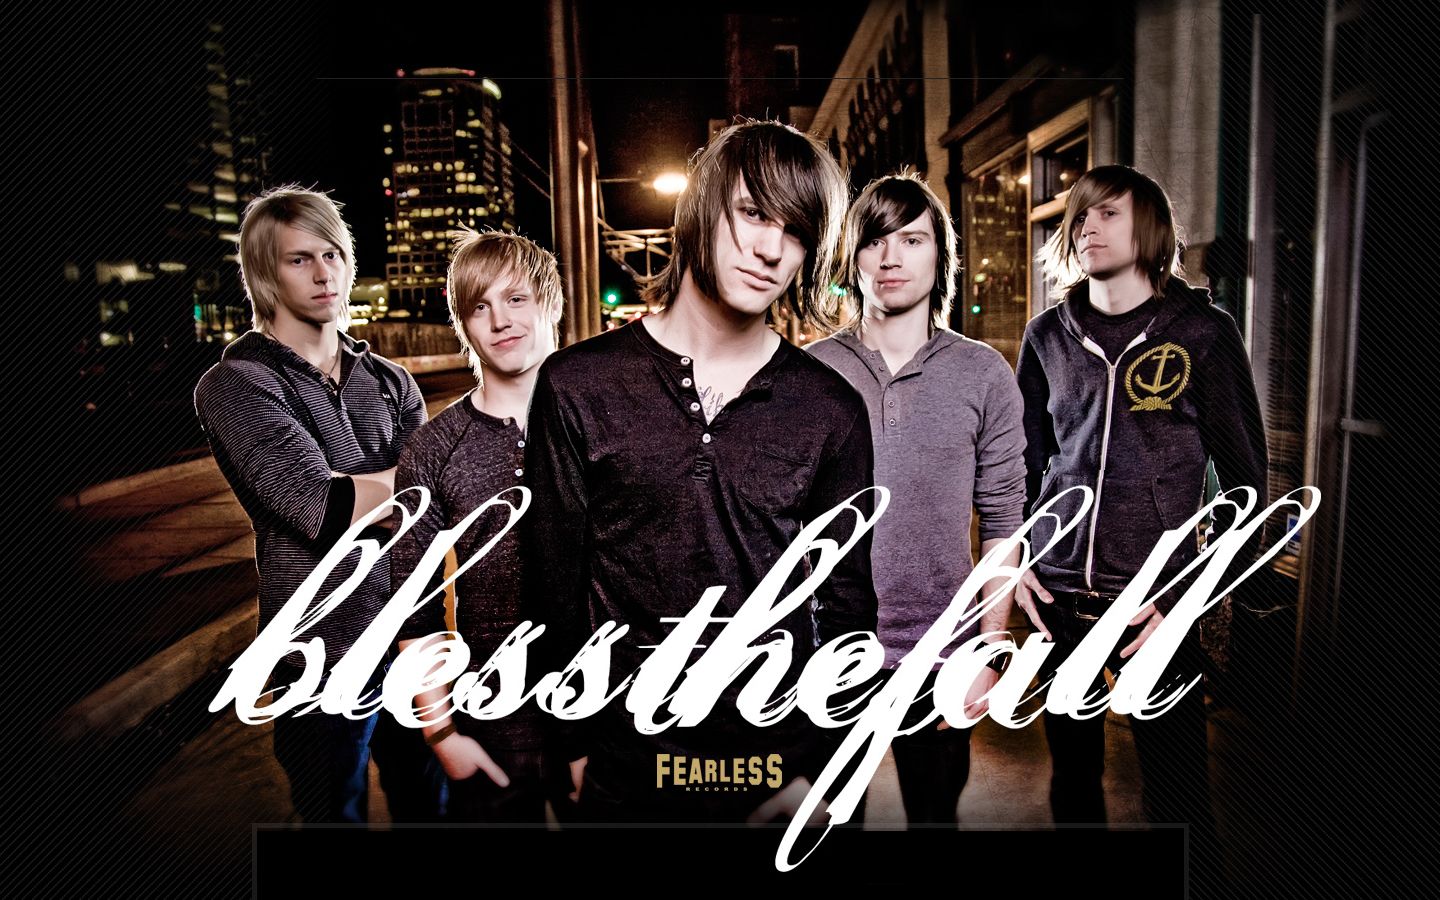 Blessthefall Wallpaper Image Amp Pictures Becuo